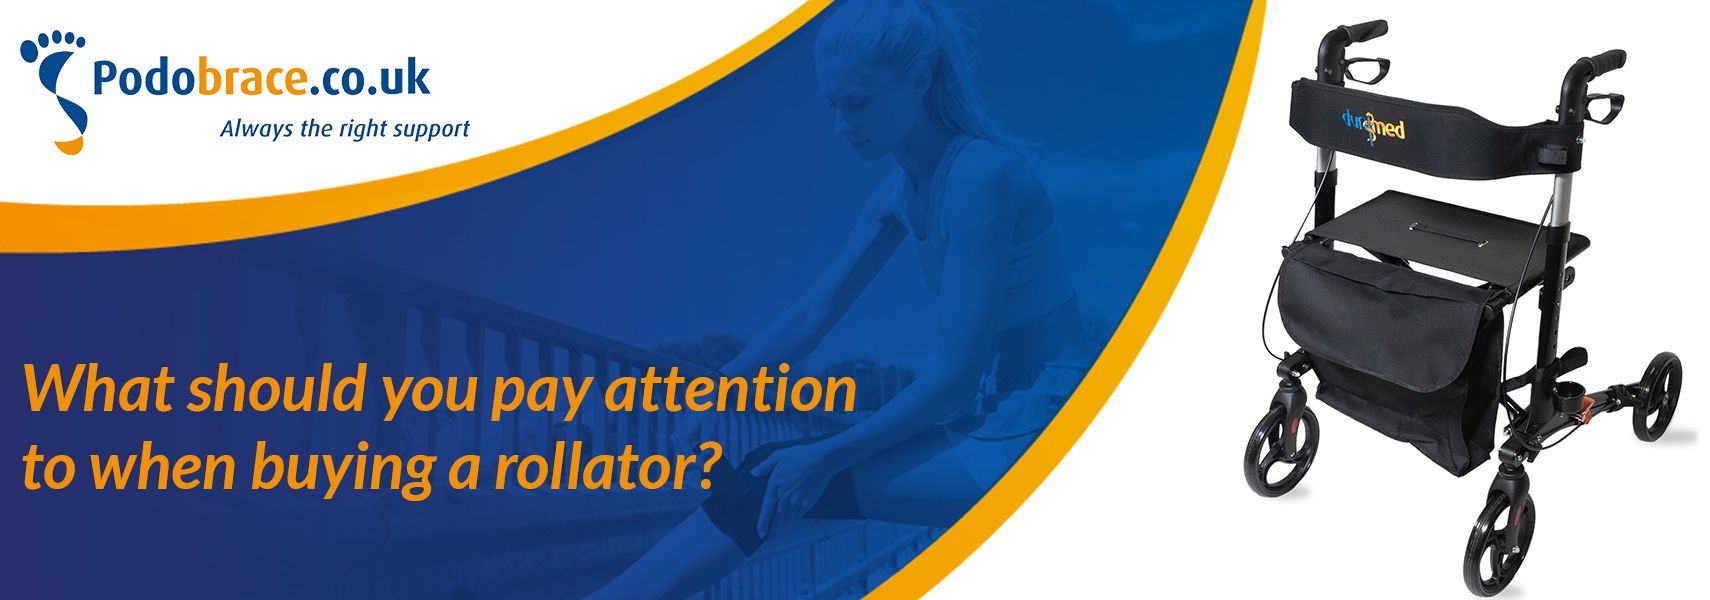 What should you pay attention to when buying a rollator